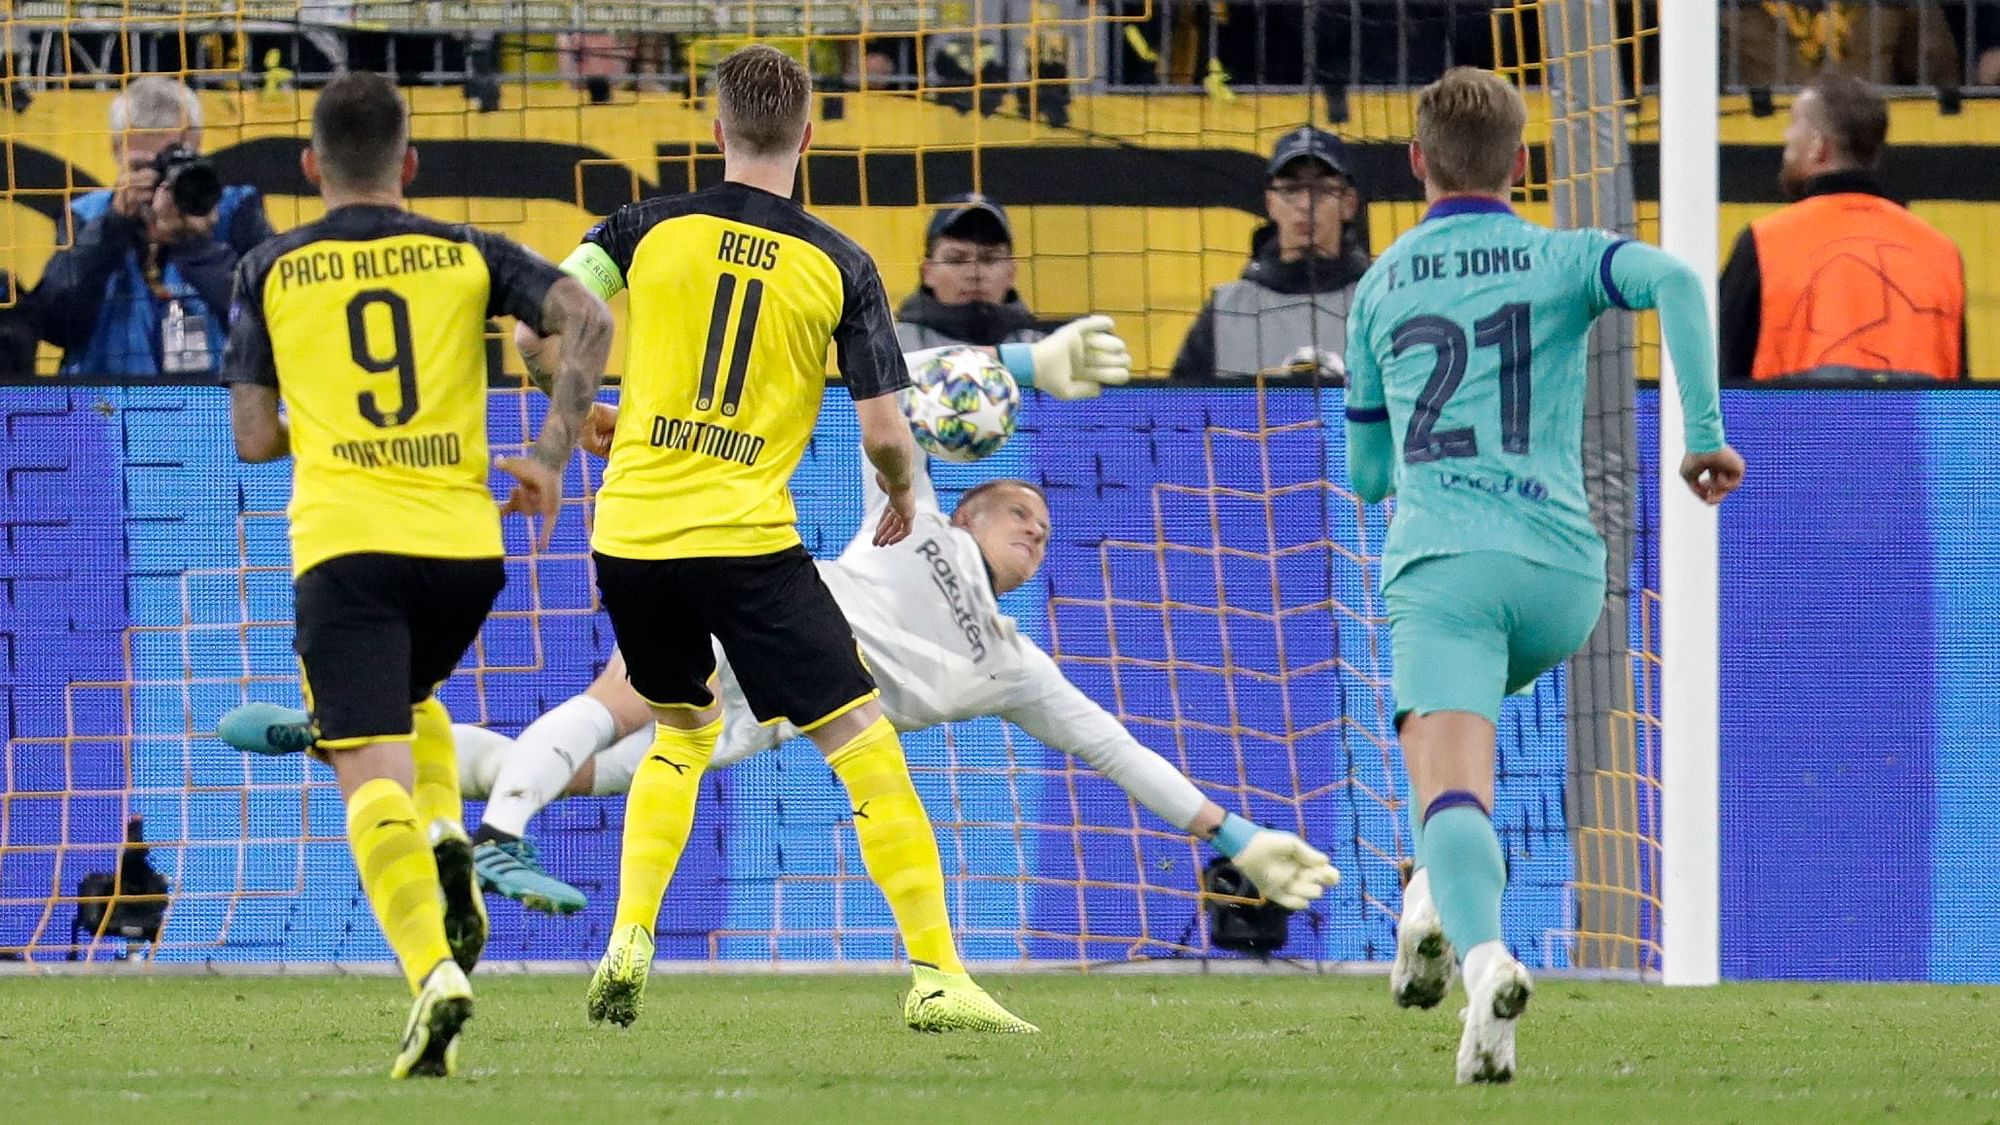 Barcelona goalkeeper Marc-Andre ter Stegen avoided a defeat by saving a penalty from Dortmund captain Marco Reus in the 57th minute.